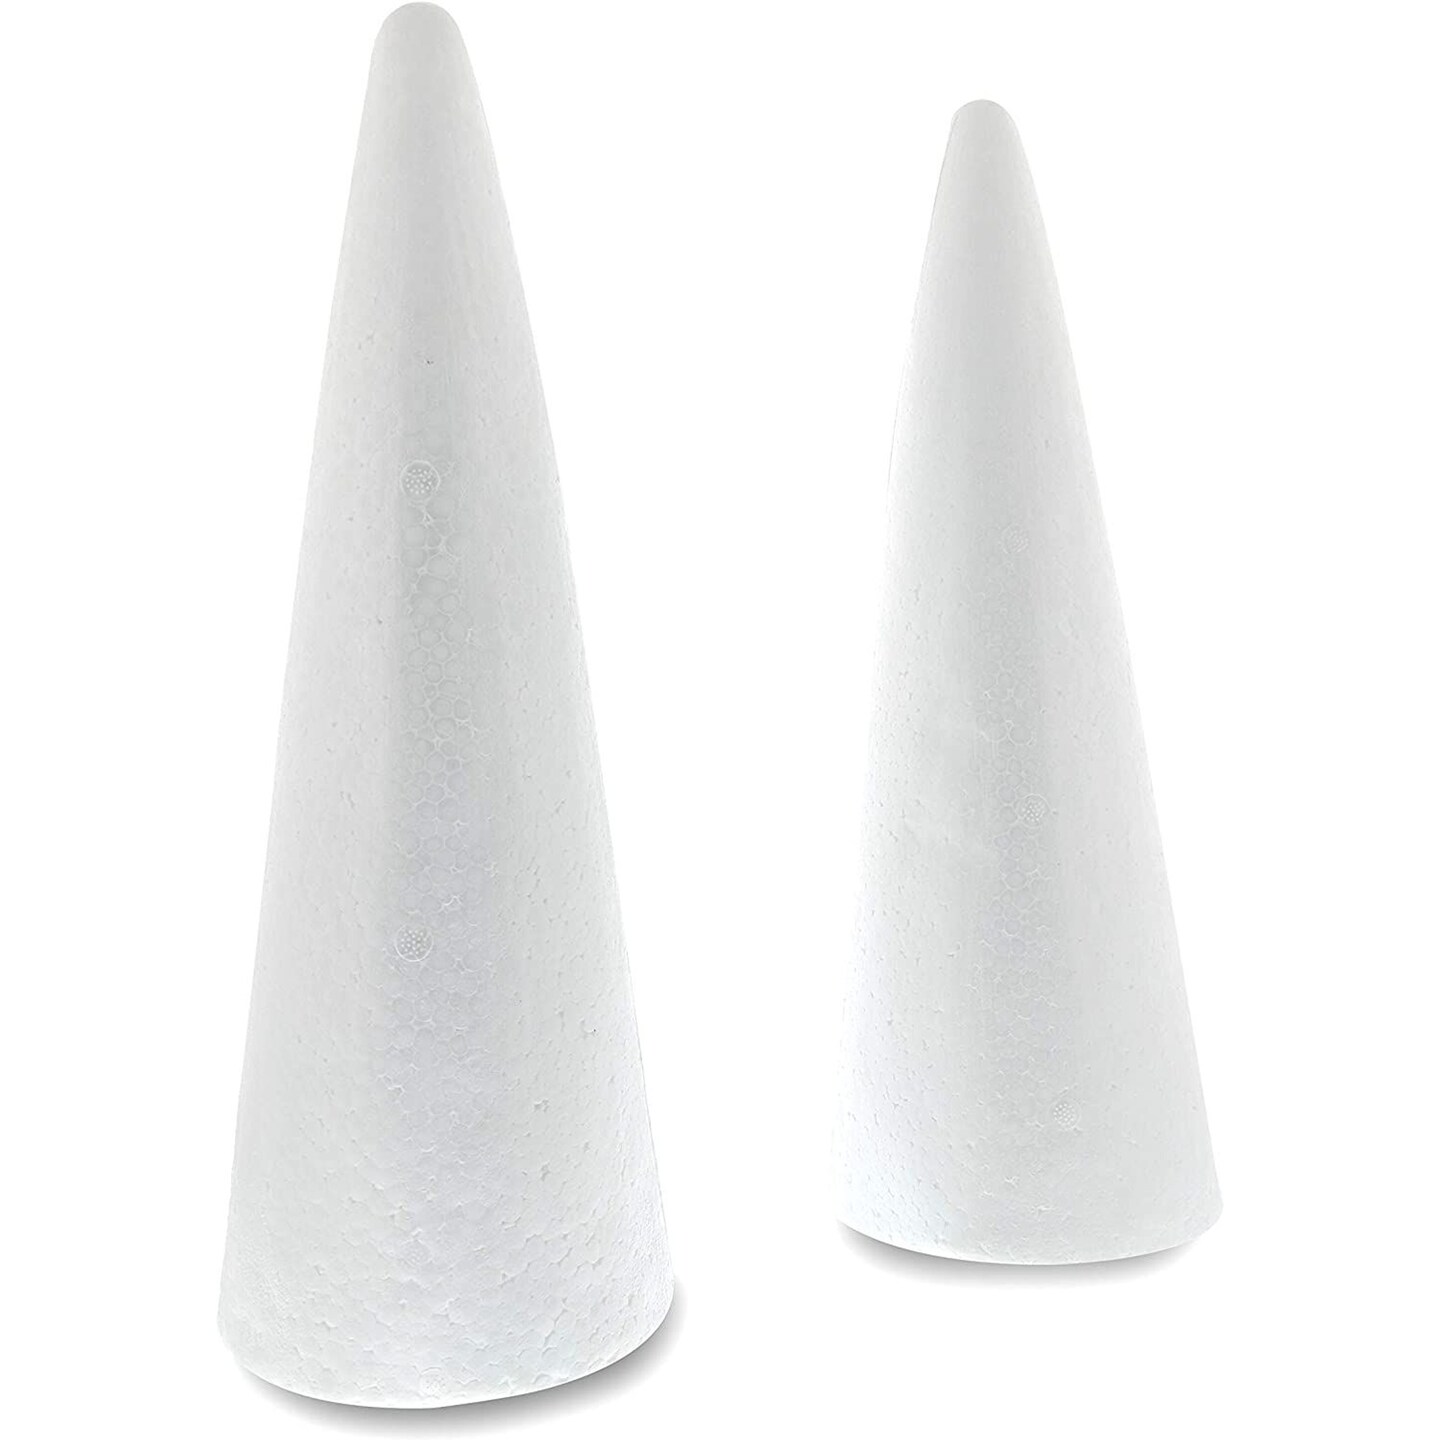 2 Pack Foam Cones for Crafts, DIY Art Projects, Handmade Gnomes, Trees,  Holiday Decorations (5.25x14.5, White)